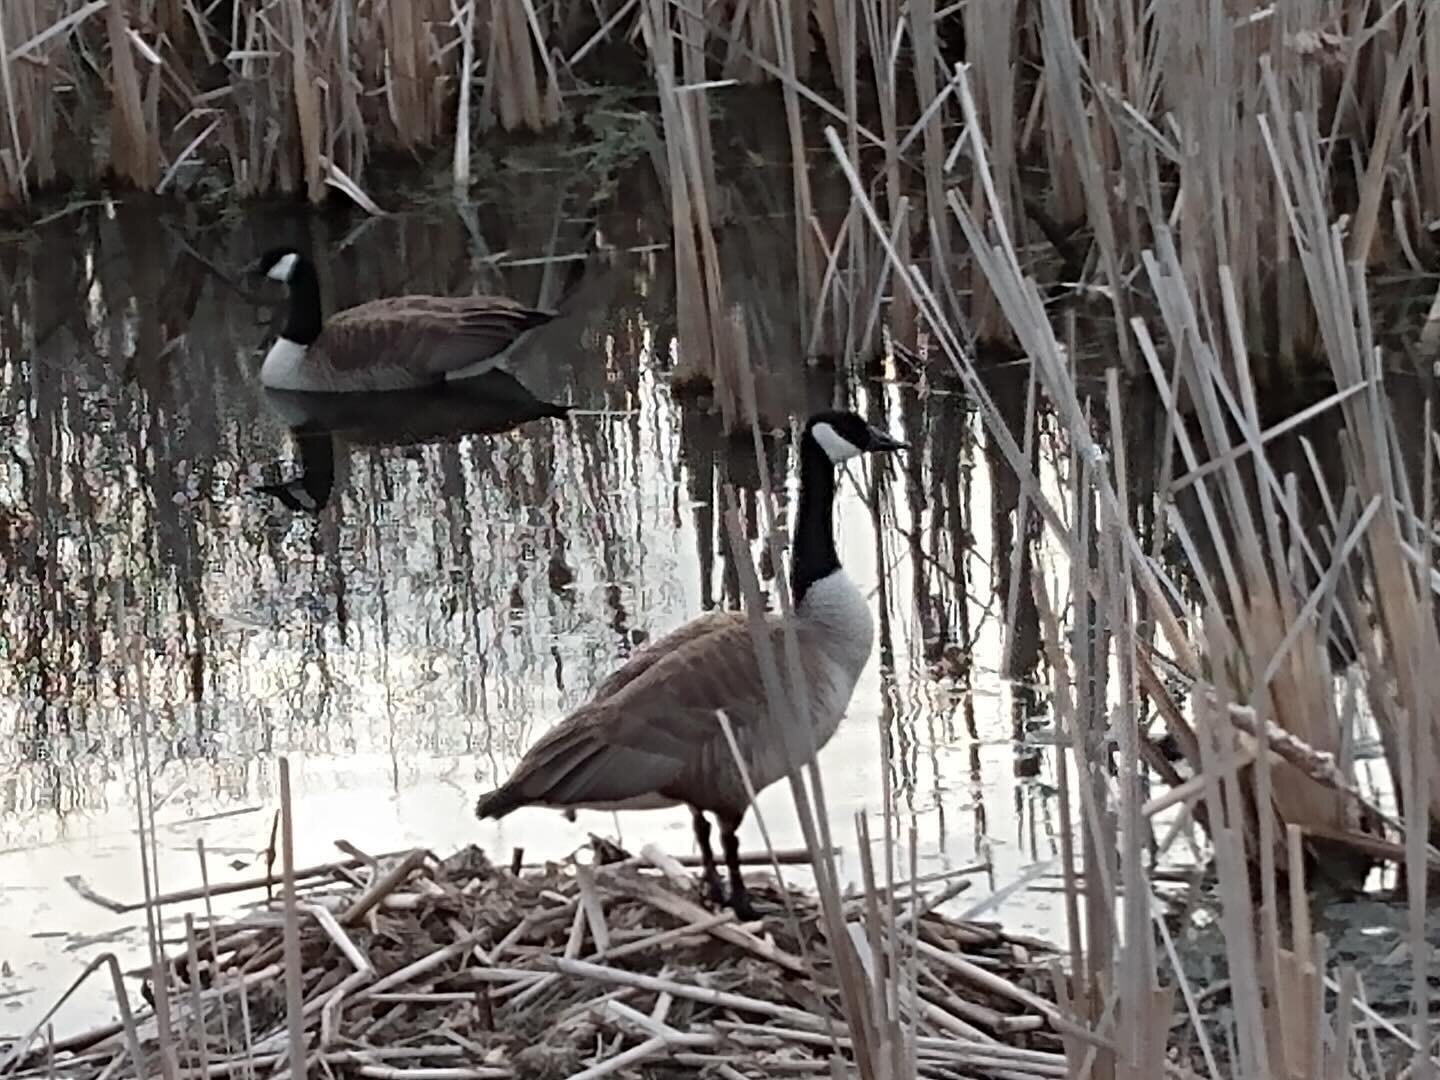 📷 The inspiration behind my latest piece. 

I walk through an area of wetlands most days, often in the cold and the dark at the moment. I find the cattails endlessly fascinating. The geese can be annoying, but I like them like this. It can get a bit